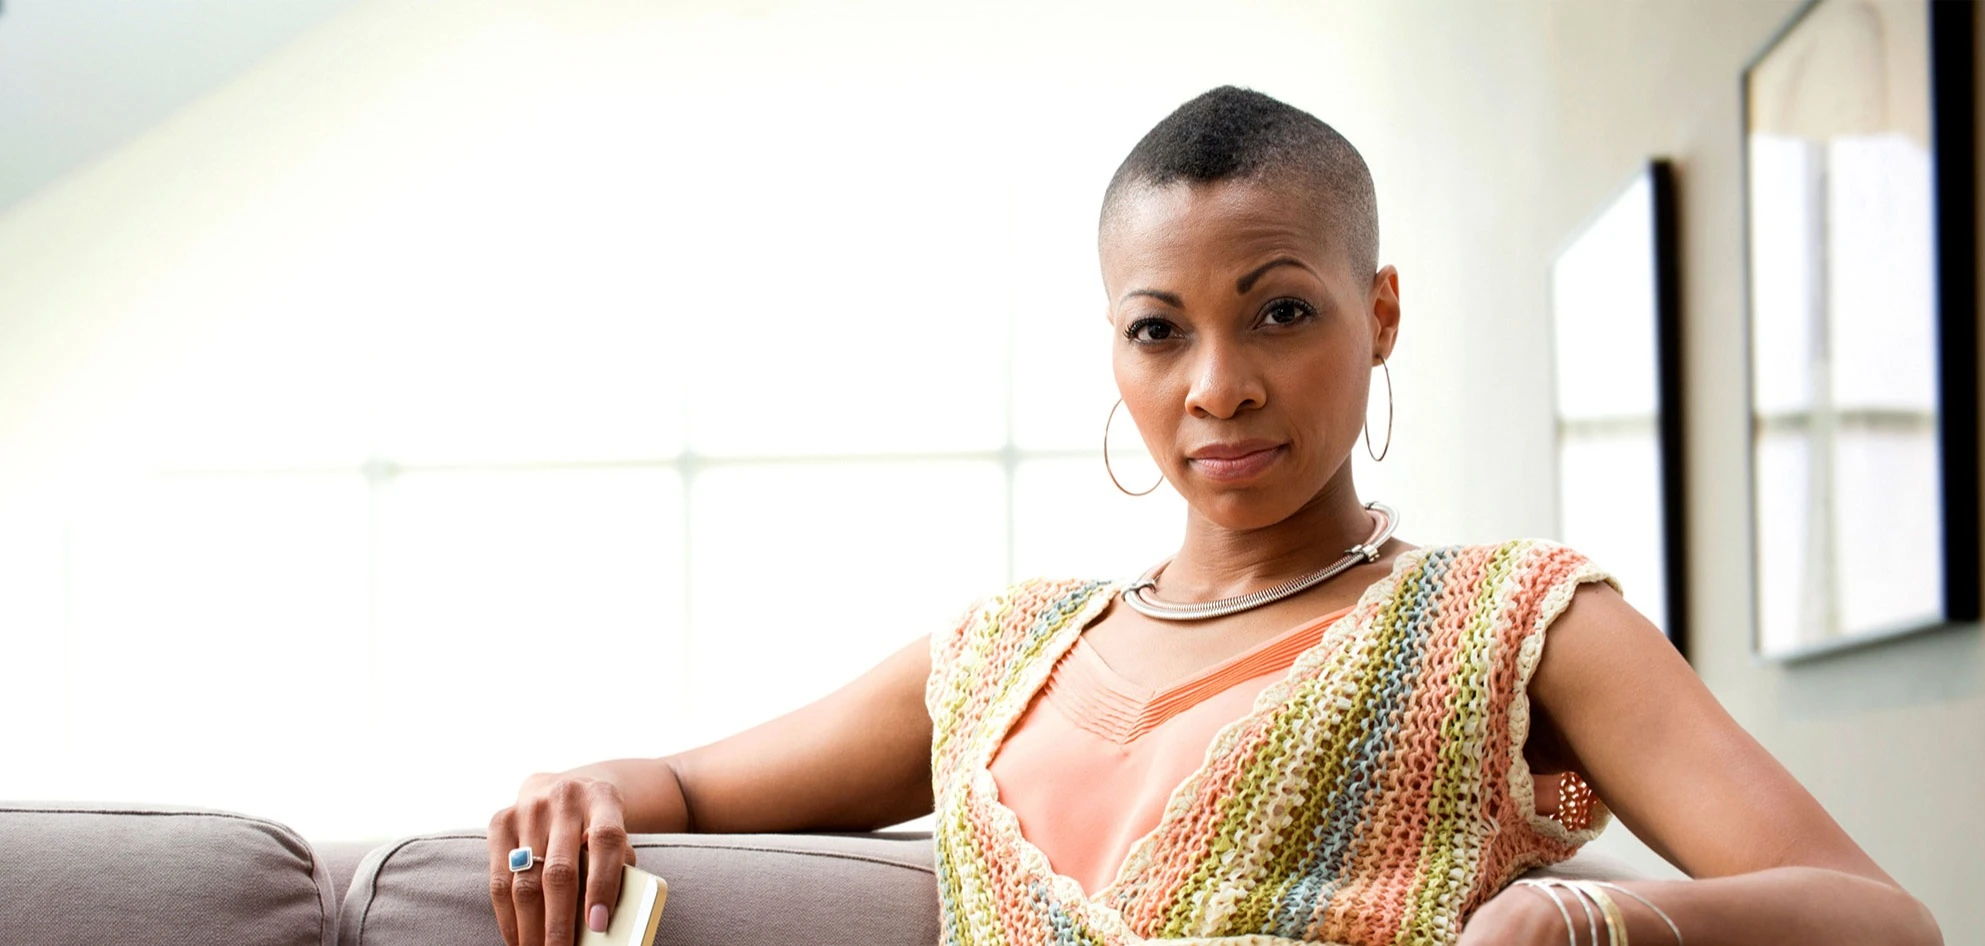 Black woman with short hair on sofa wearing open knit striped sweater vest, looking at camera with serious expression. AW247